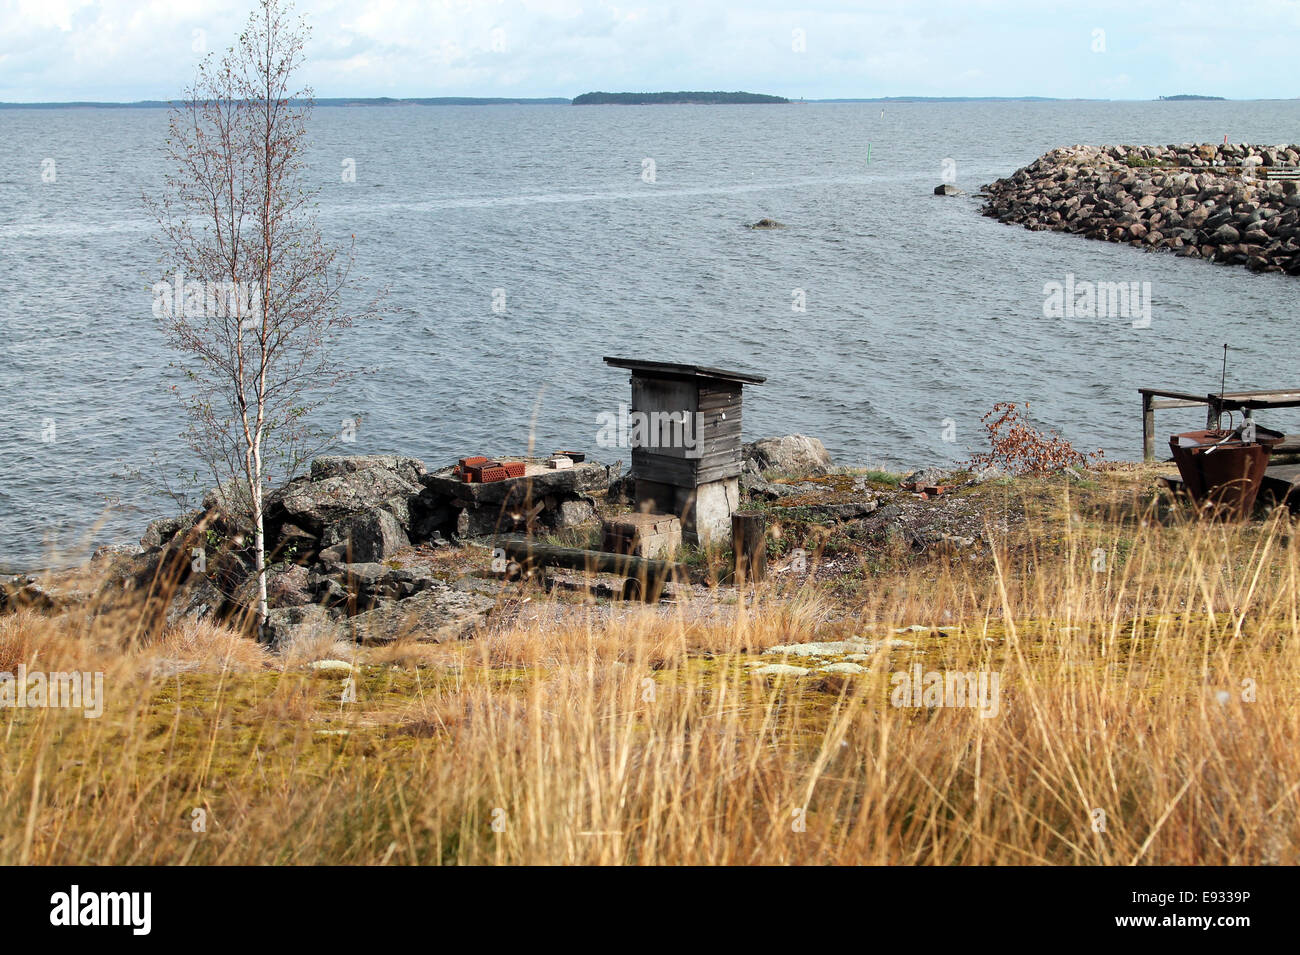 And old Finnish style grill next to ocean Stock Photo